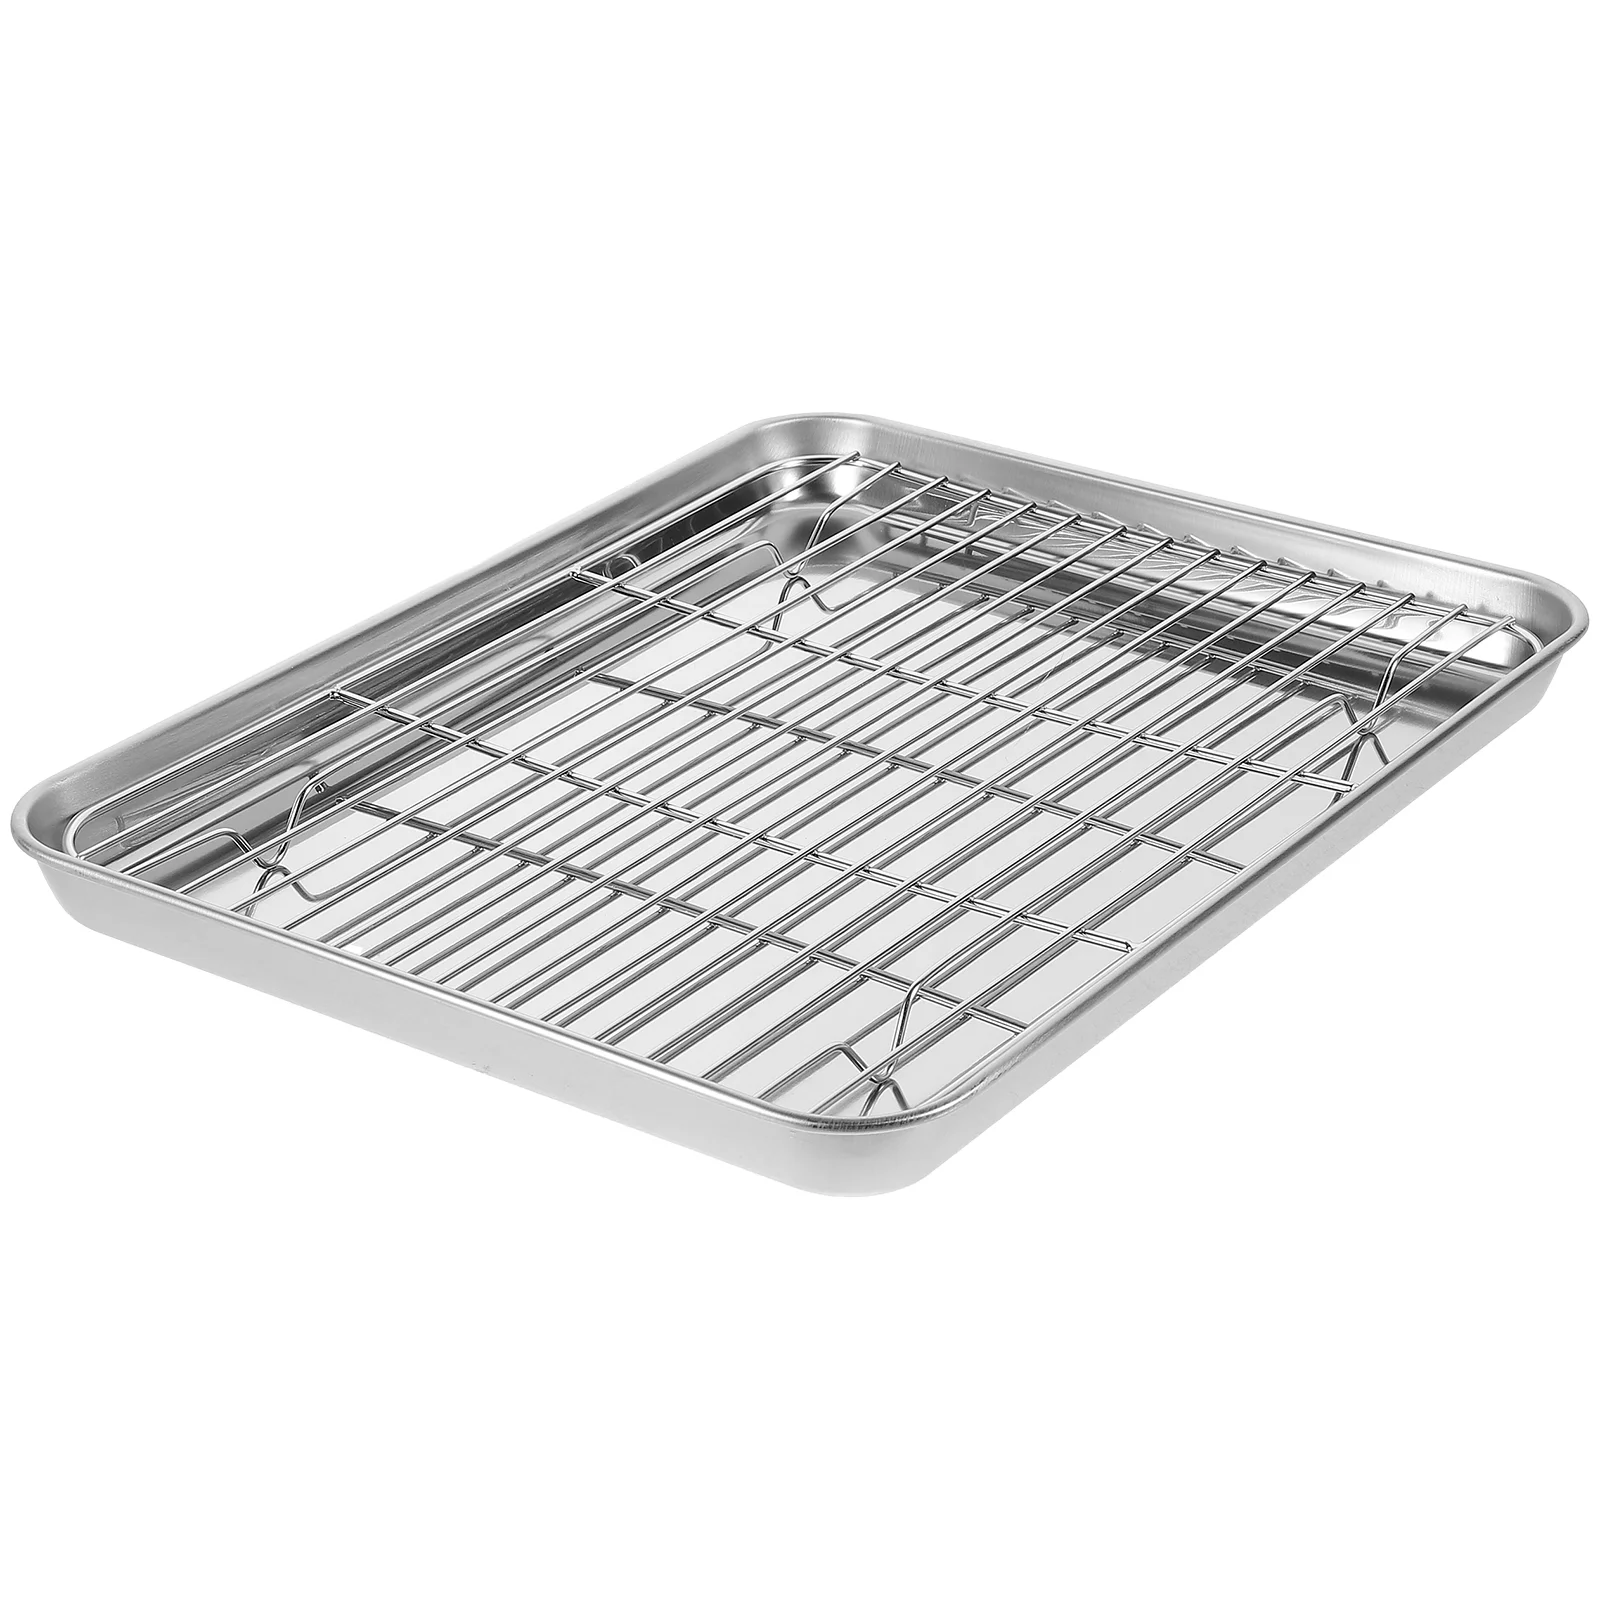 

2 Pieces/Set Rectangular Baking Tray Stainless Steel Baking Pan Sheet with Removable Cooling Rack - 31x24x25cm